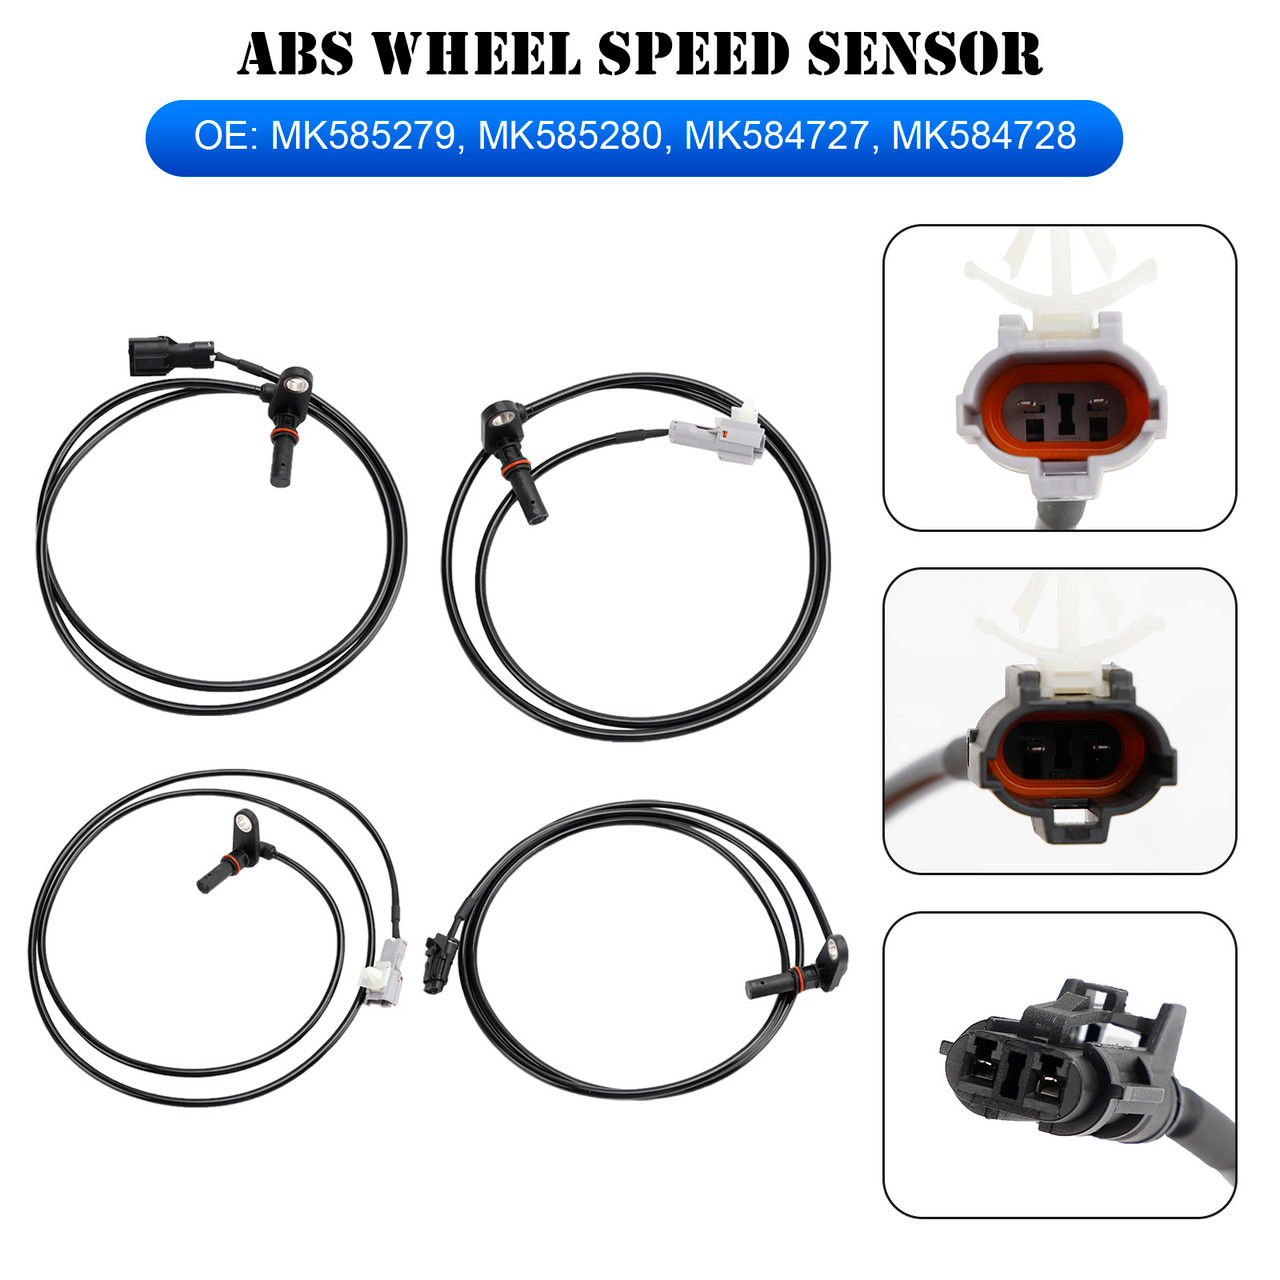 4X Front Rear Left Right ABS Wheel Speed Sensor For Mitsubishi Fuso Canter 3.0